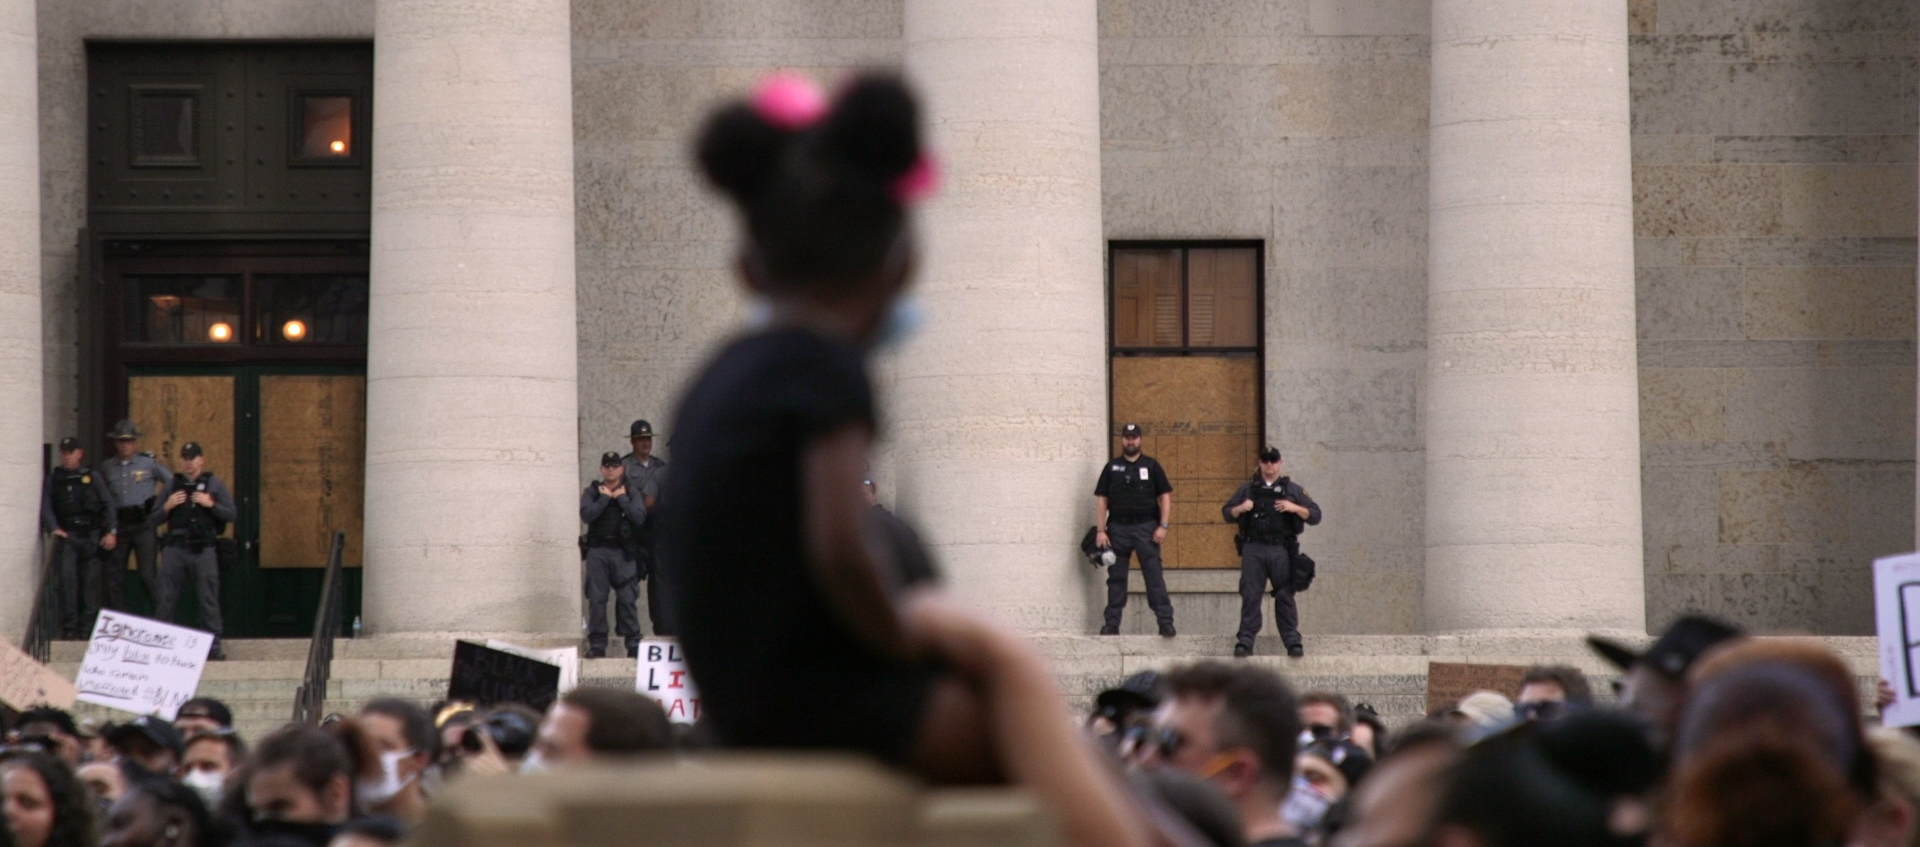 A child in the foreground sits and watches a protest. Police officers also watch.